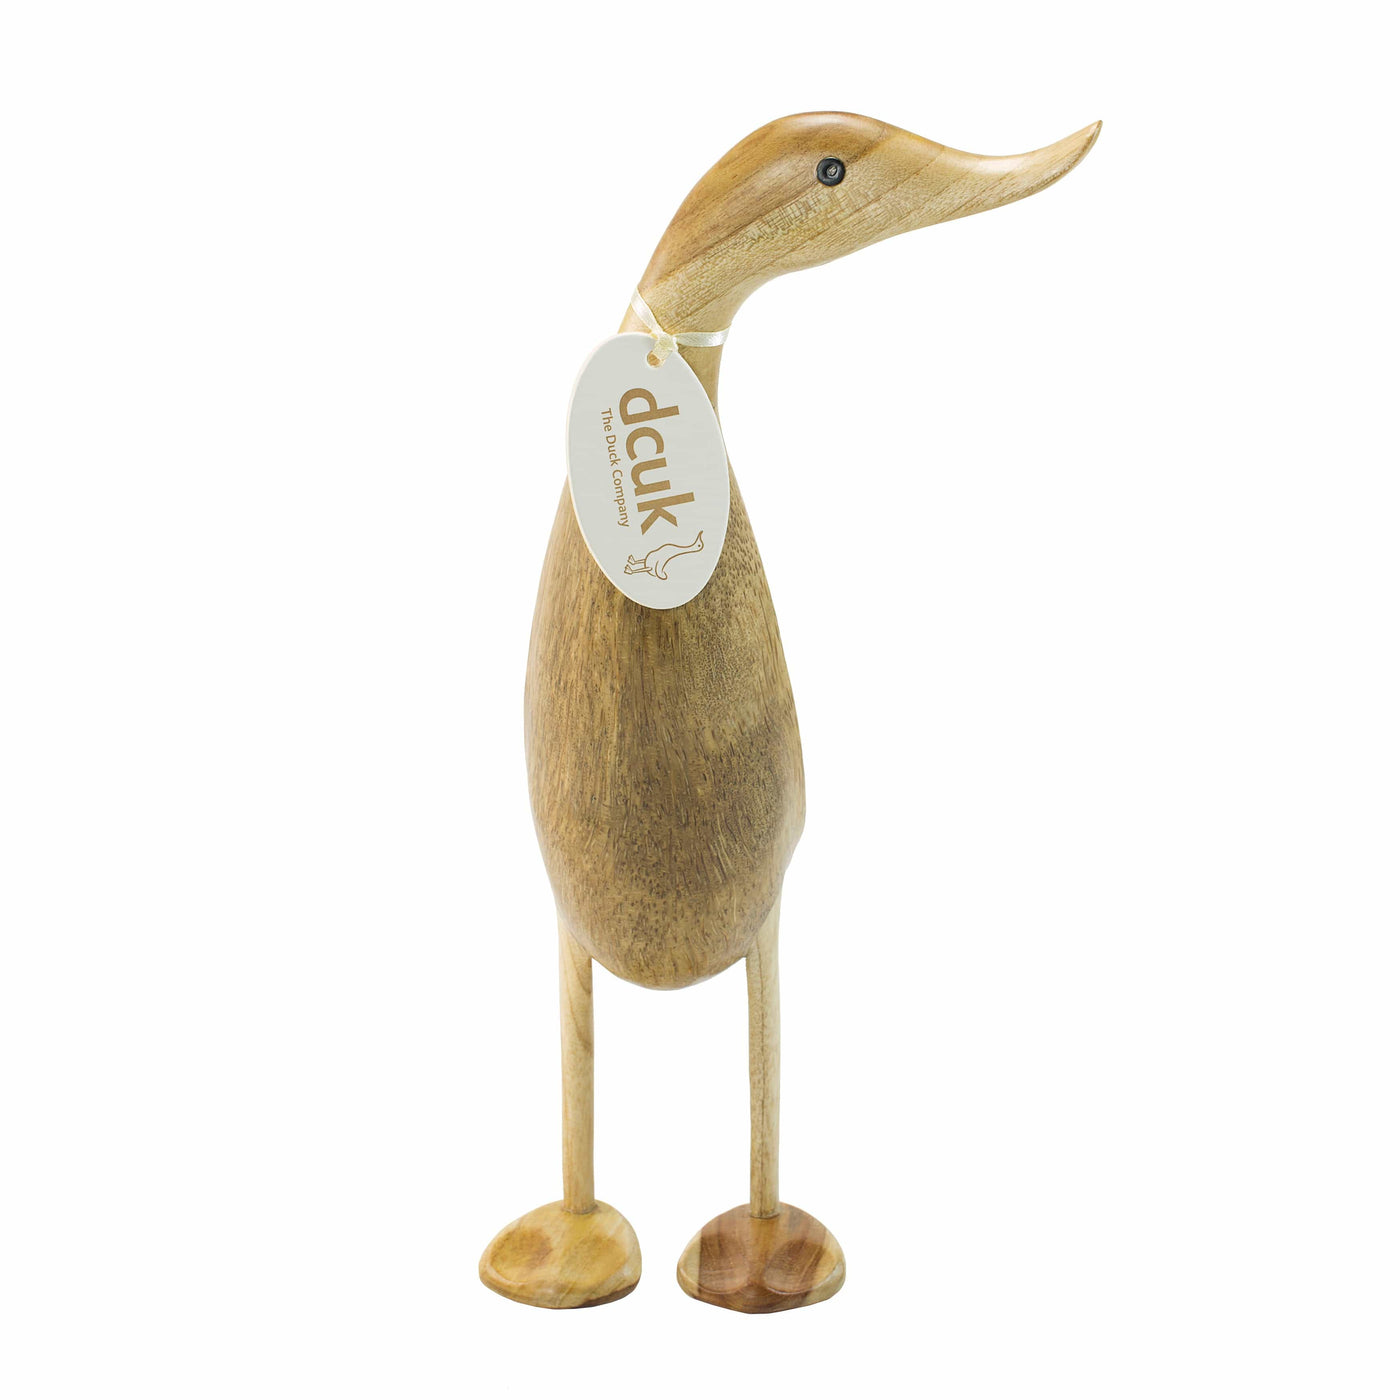 DCUK Ornaments Natural Wooden Ducklet Home Ornament